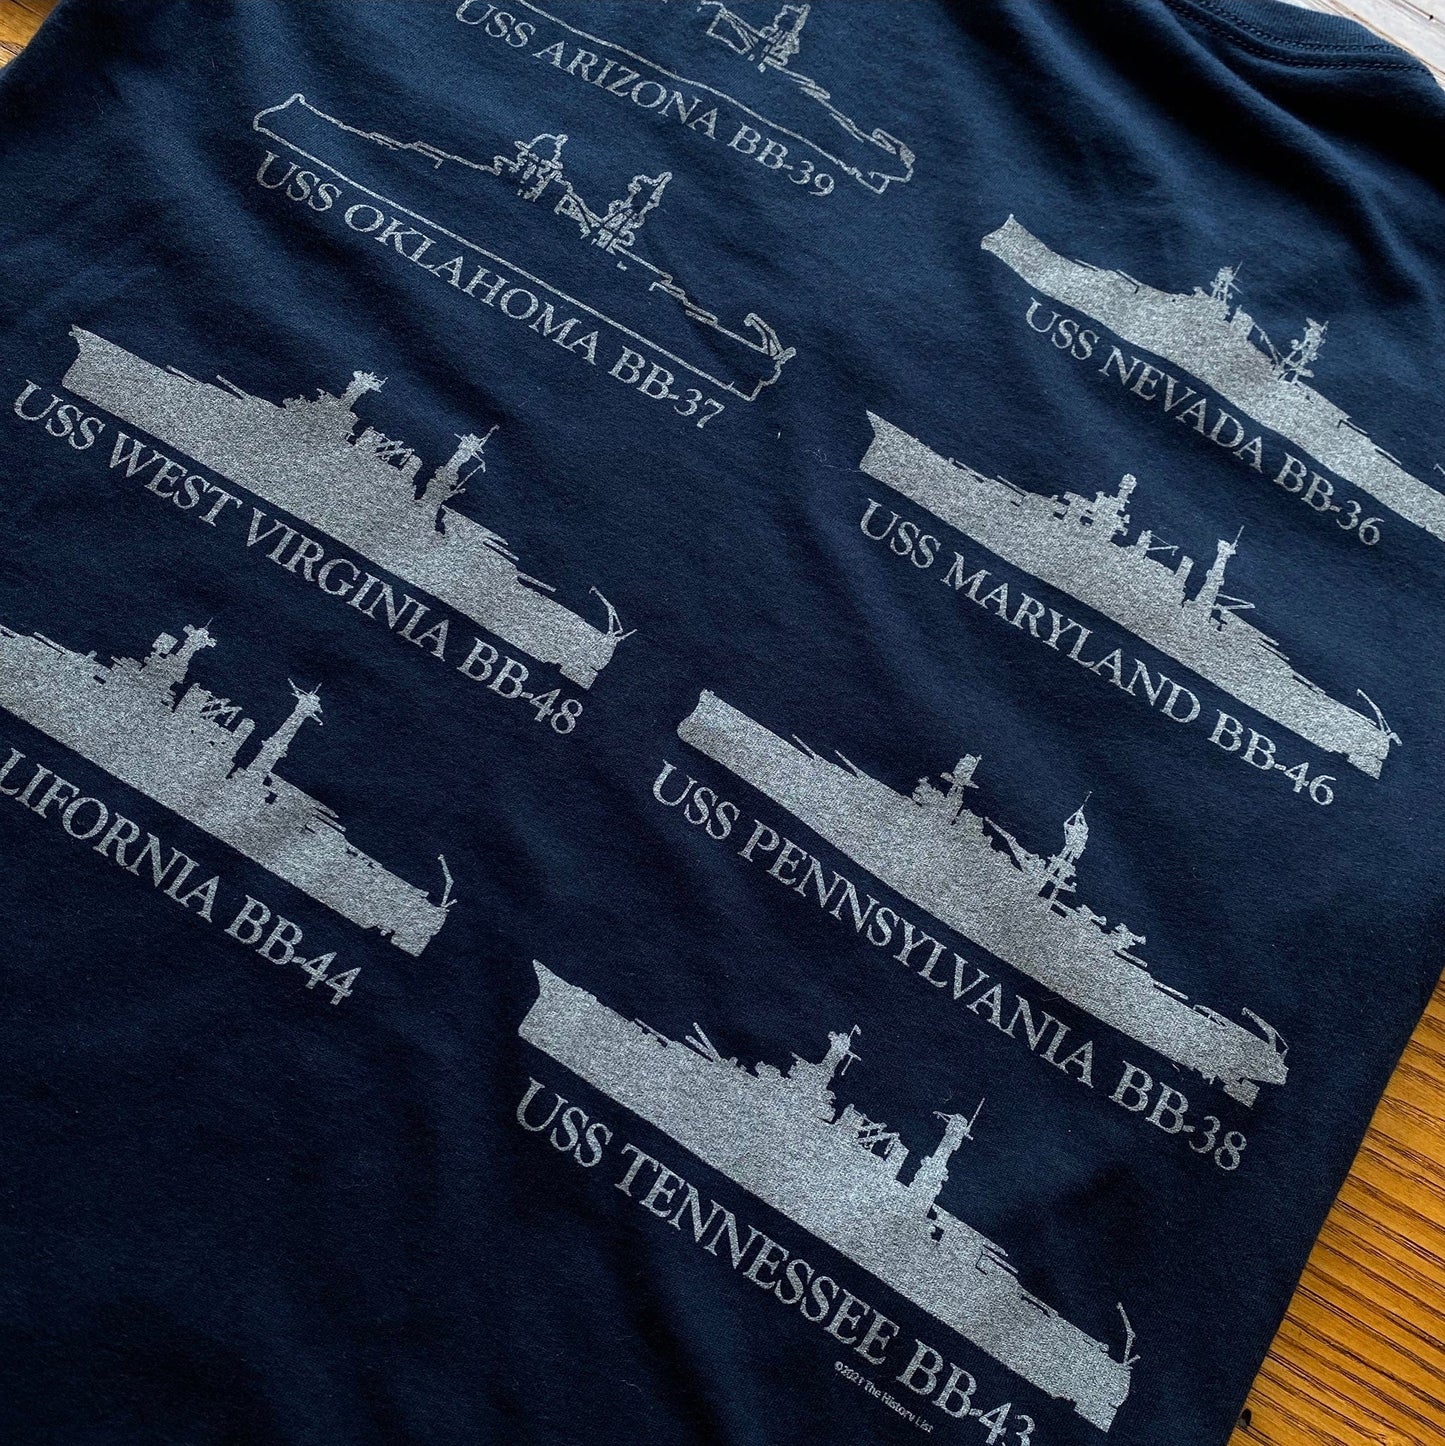 Close-up Back Pearl Harbor “Battleship Row” Women's v-neck shirt from the History List Store